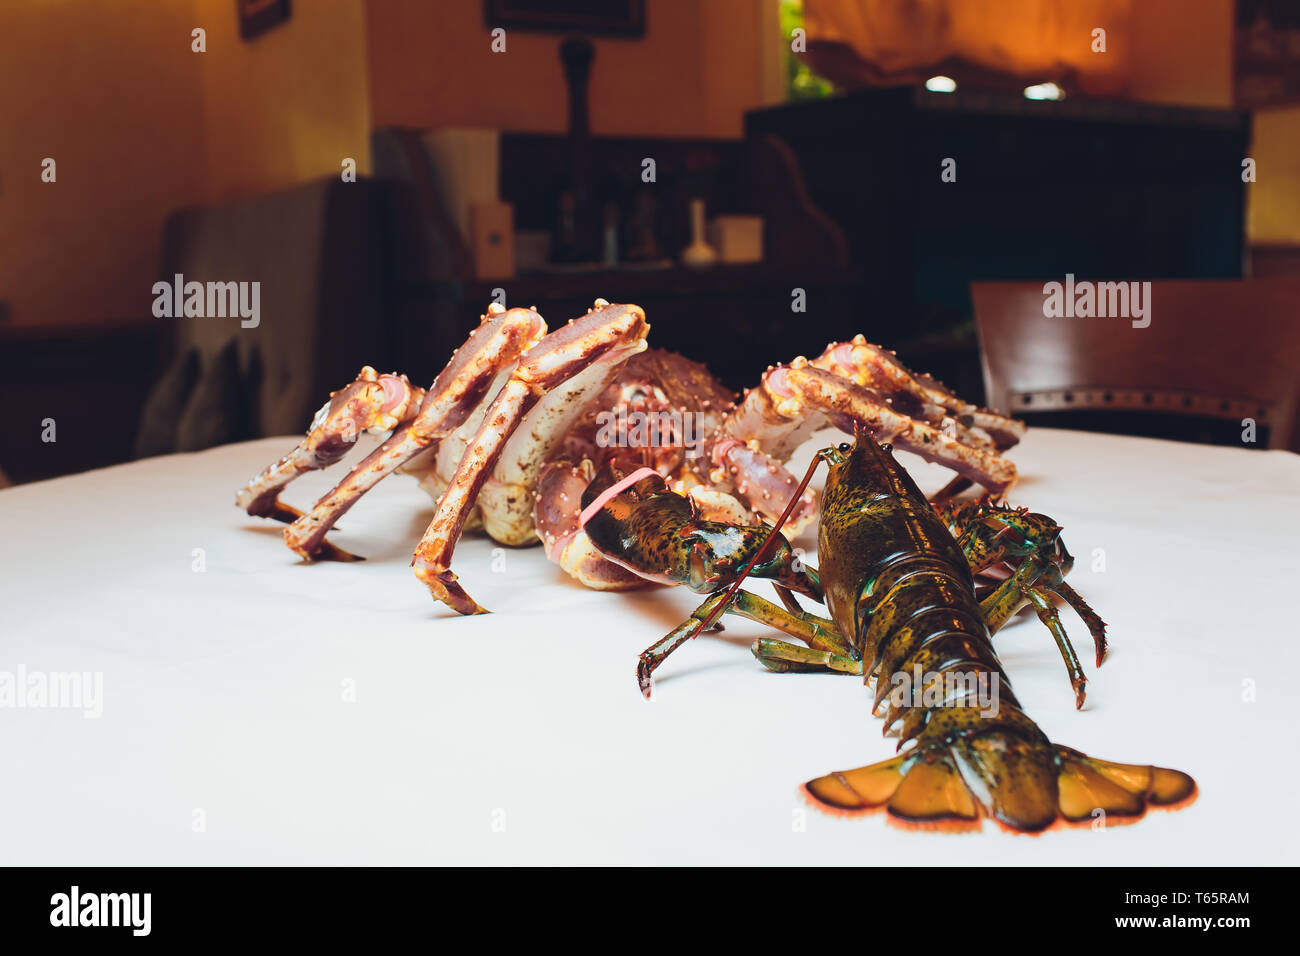 King Crab And Lobster Live Opposite Each Other On A White